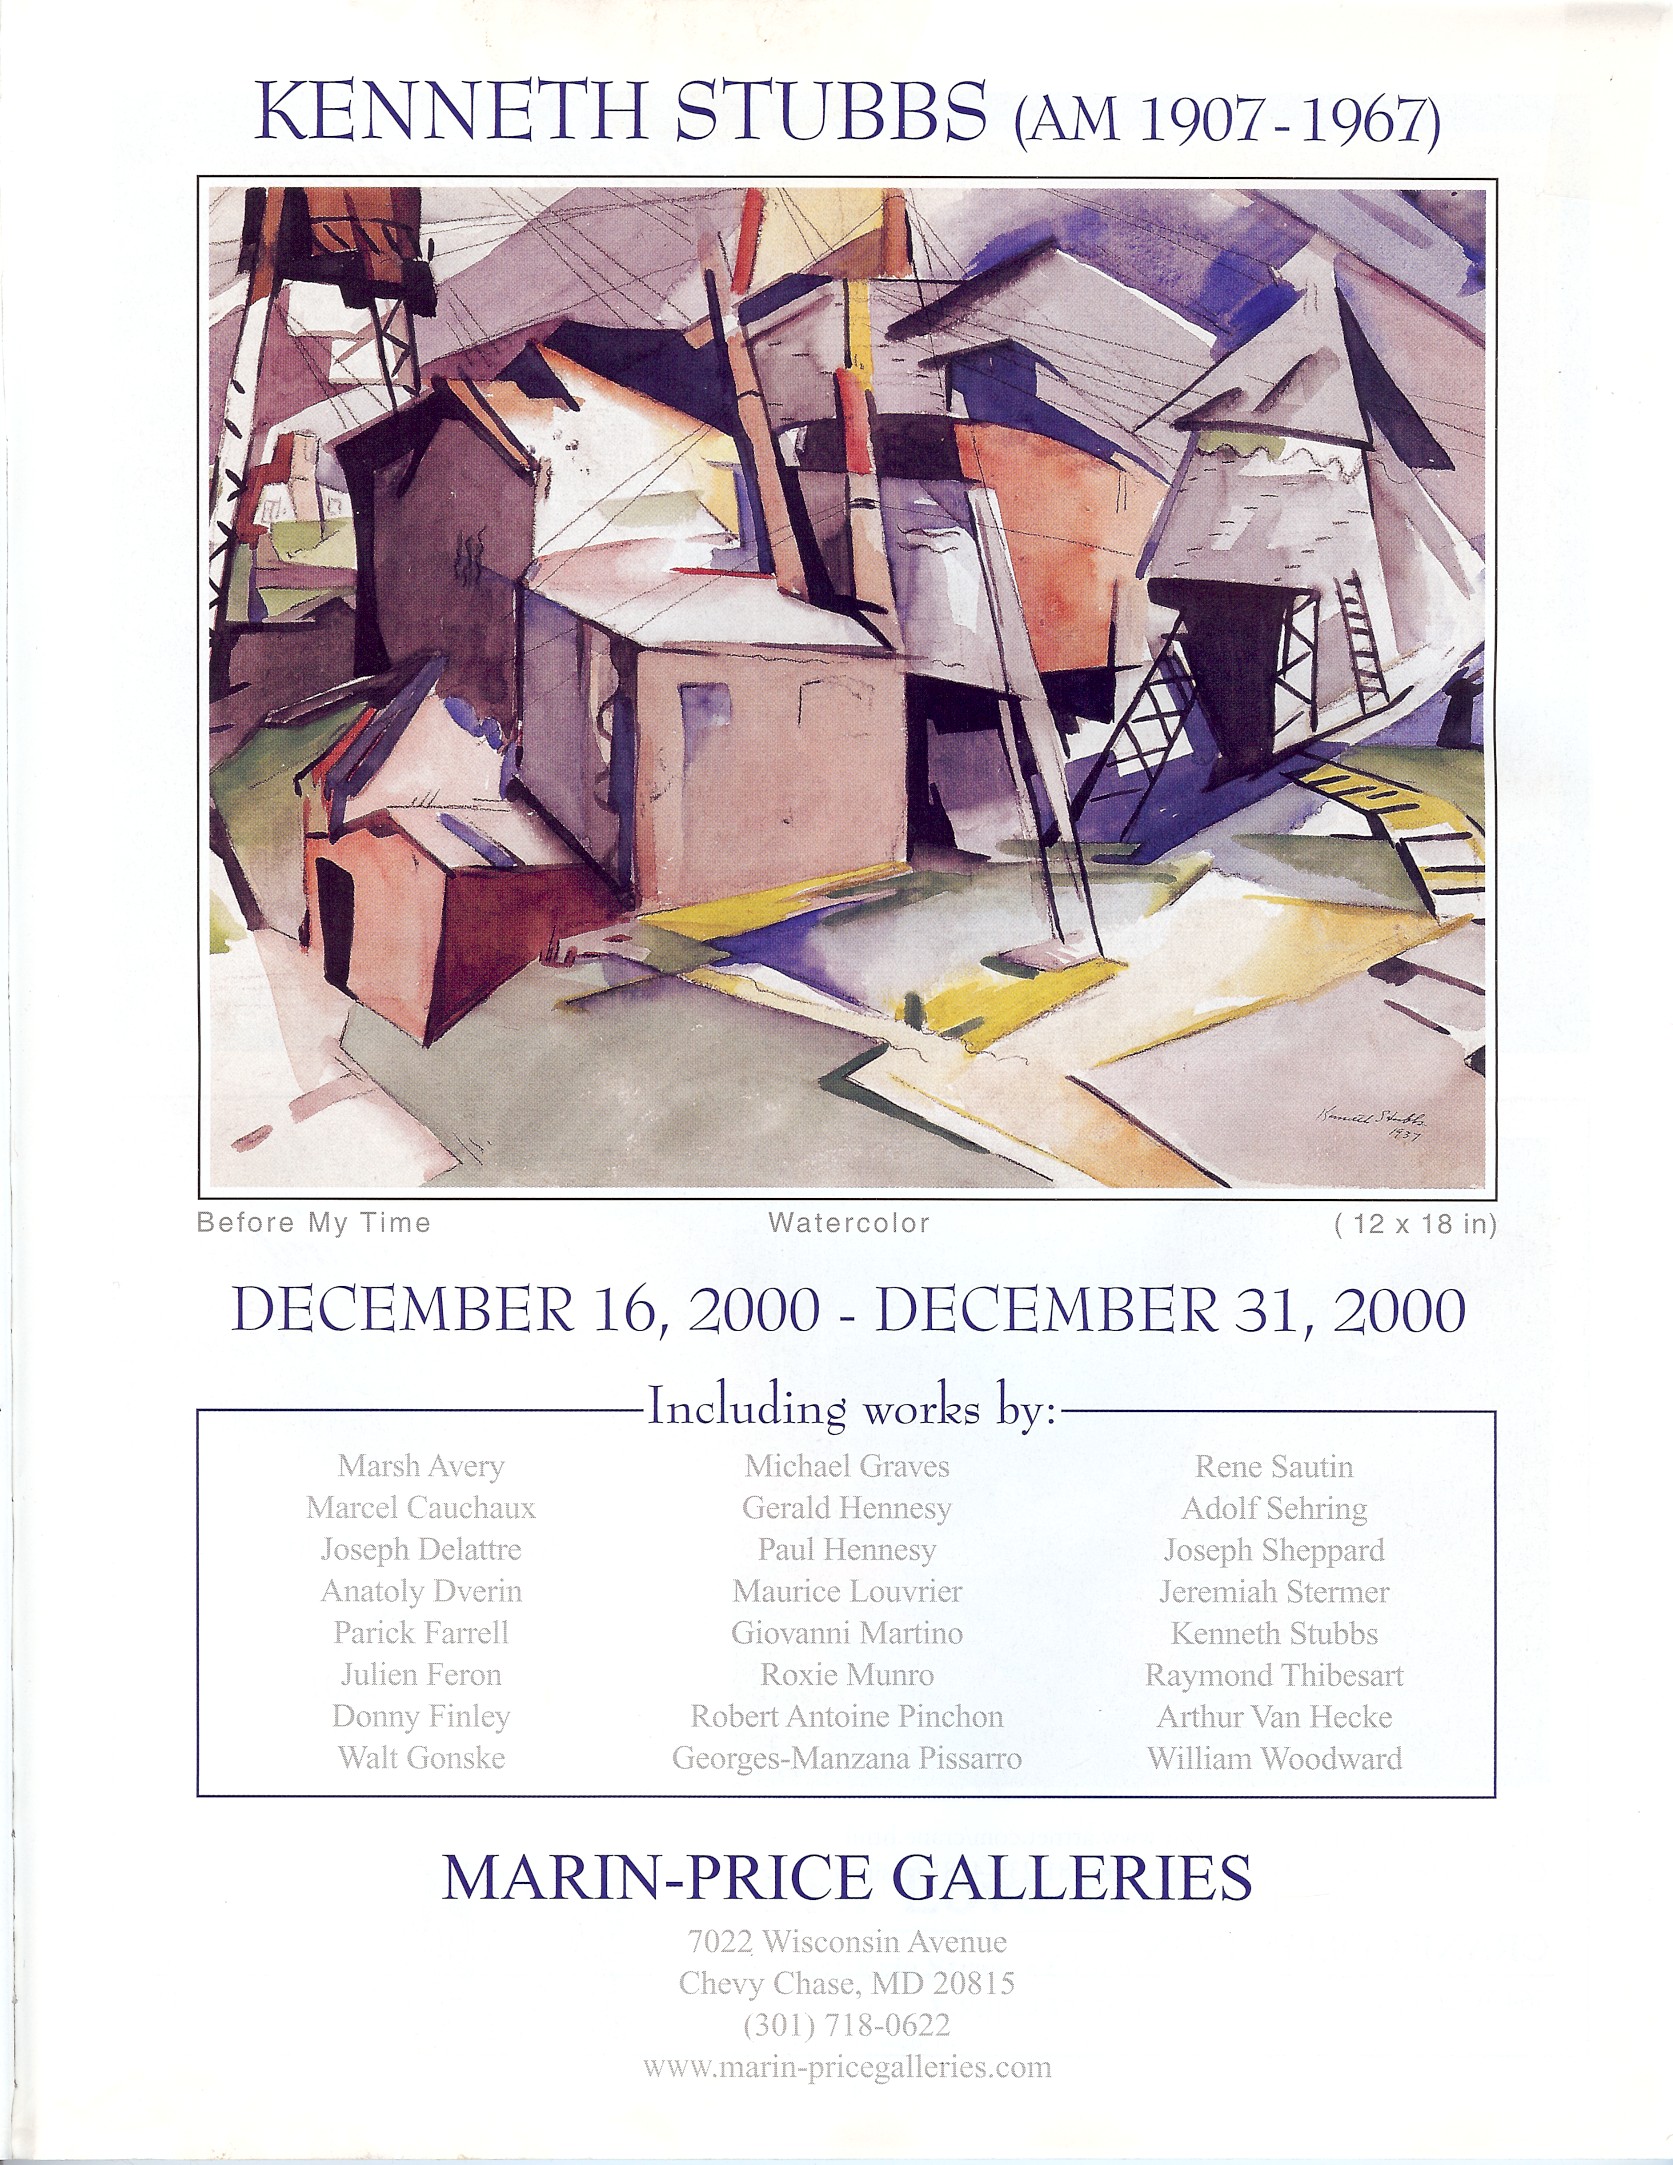 Kenneth Stubbs (AM 1970-1967). Before My Time; Watercolor; 12 x 18 in. December 16, 2000 - December 31, 2000. [List of artists included in show]. Marin-Price Galleries; 7022 Wisconsin Avenue, Chevy Chase, MD 20815; (301) 718-0622; www.marin-pricegalleries.com